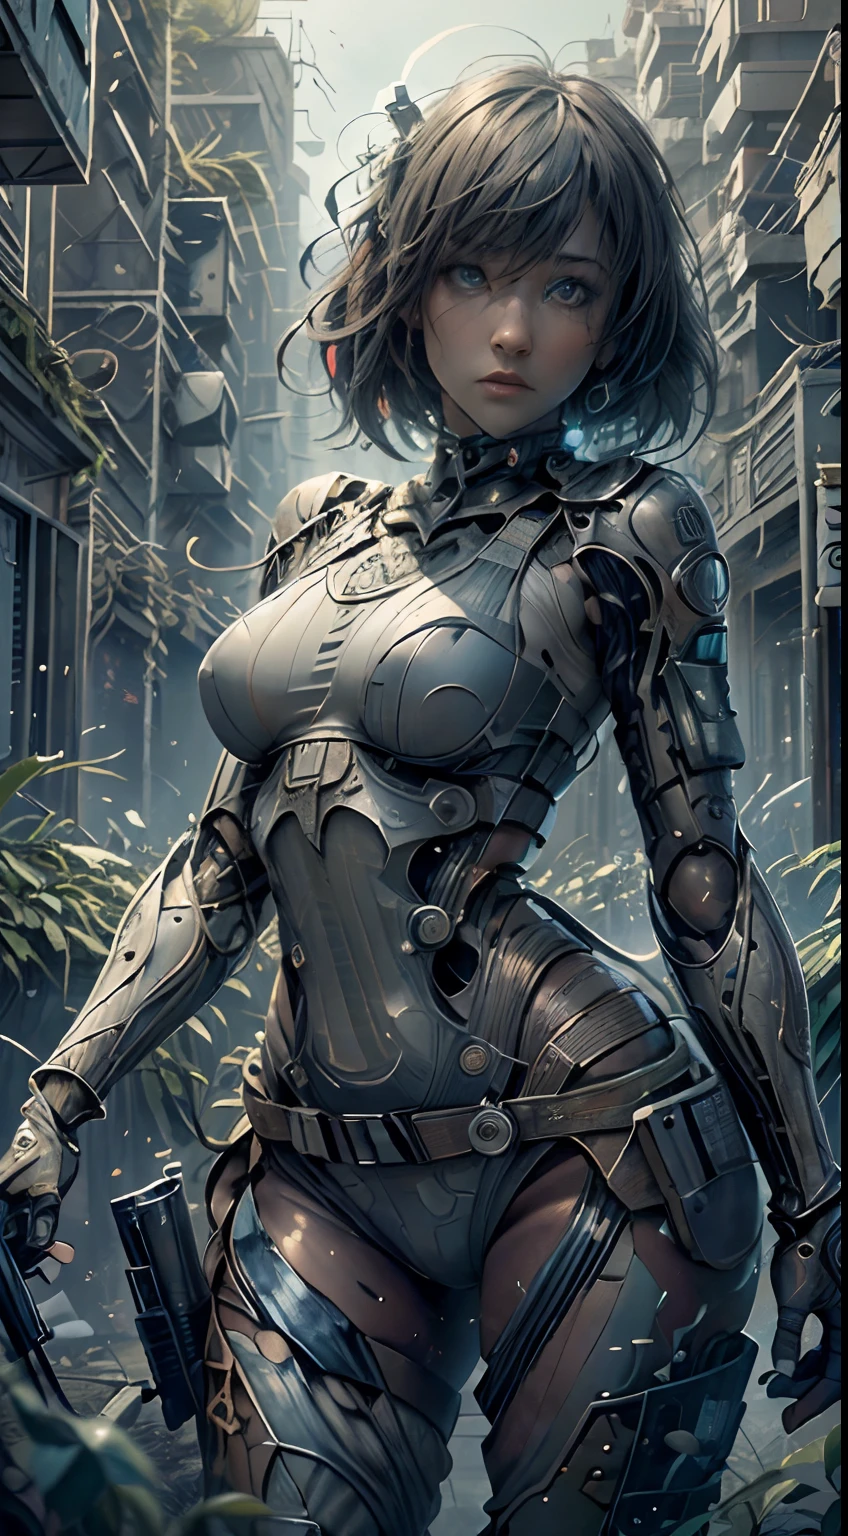 Masterpiece,(best qualtiy),highly  detailed,Ultra-detailed,1 mechanical female soldier, solo person, full bodyesbian，（Machine-made joints：1.5），(tactical gear:1.2), (Blue eyes), (Serious expression), (Gun:1.5), (during night:0.7), (urban surroundings), (Dynamic pose), (glowing neon lights:0.9), (smoke effect:0.6), depth of fields， Maximum clarity and sharpness， Many-Layer Textures， Albedo e mapas Speculares，Surface Coloring，Accurately simulate photo-material interactions，perfectly proportions，rendering by octane，twotonelighting，largeaperture，Low ISO，White balance，trichotomy，8K RAW，High-Efficiency Sub-Pixel，sub-pixel convolution